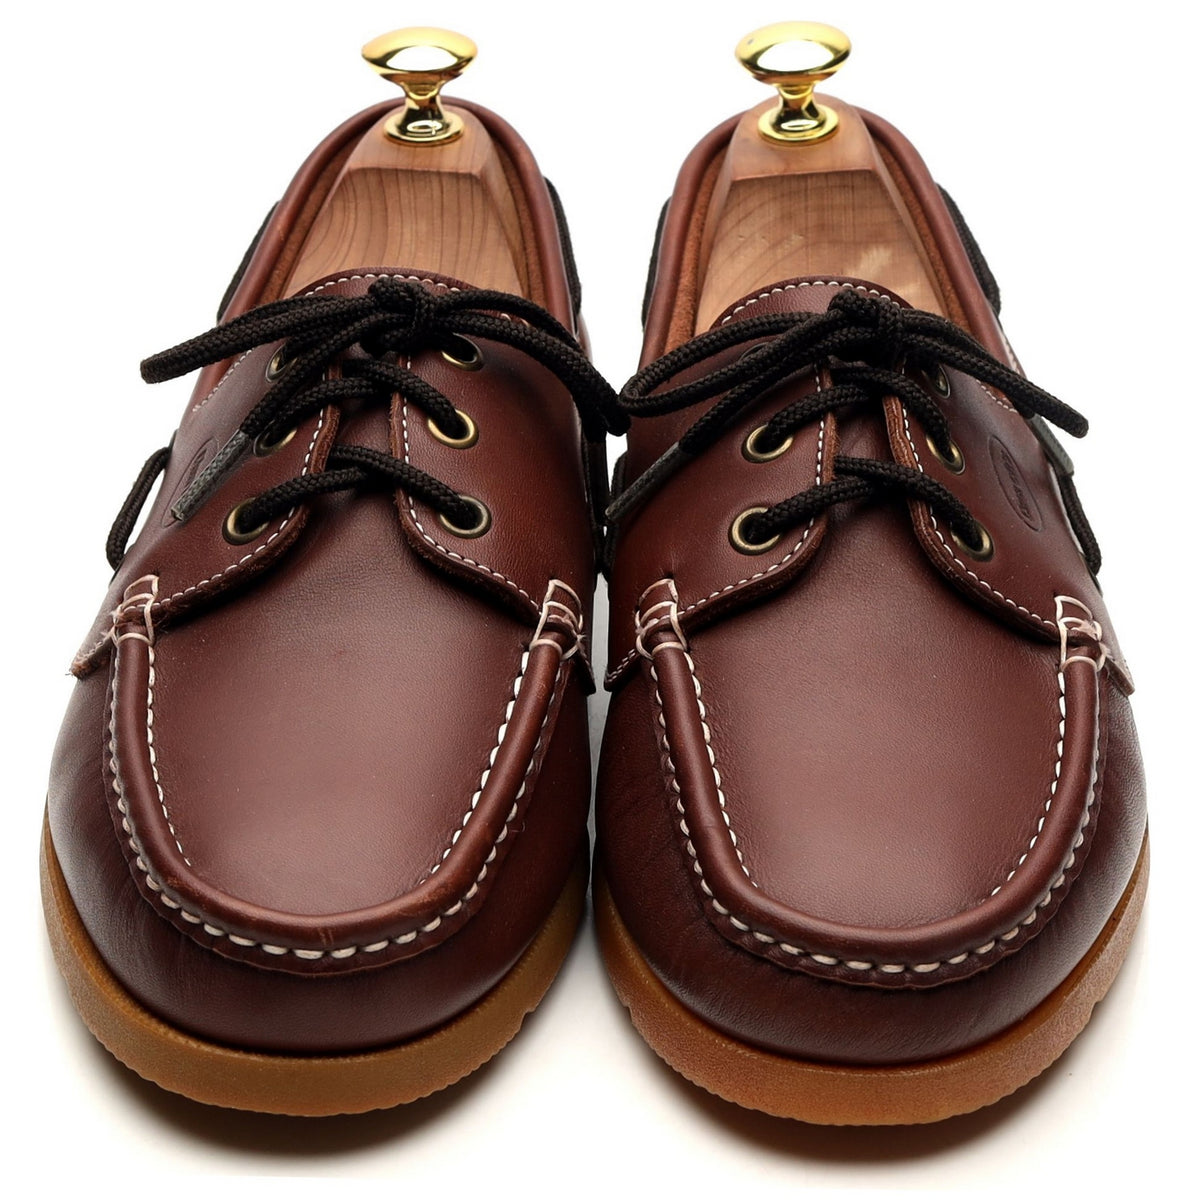 Brown Leather Boat Shoes UK 8.5